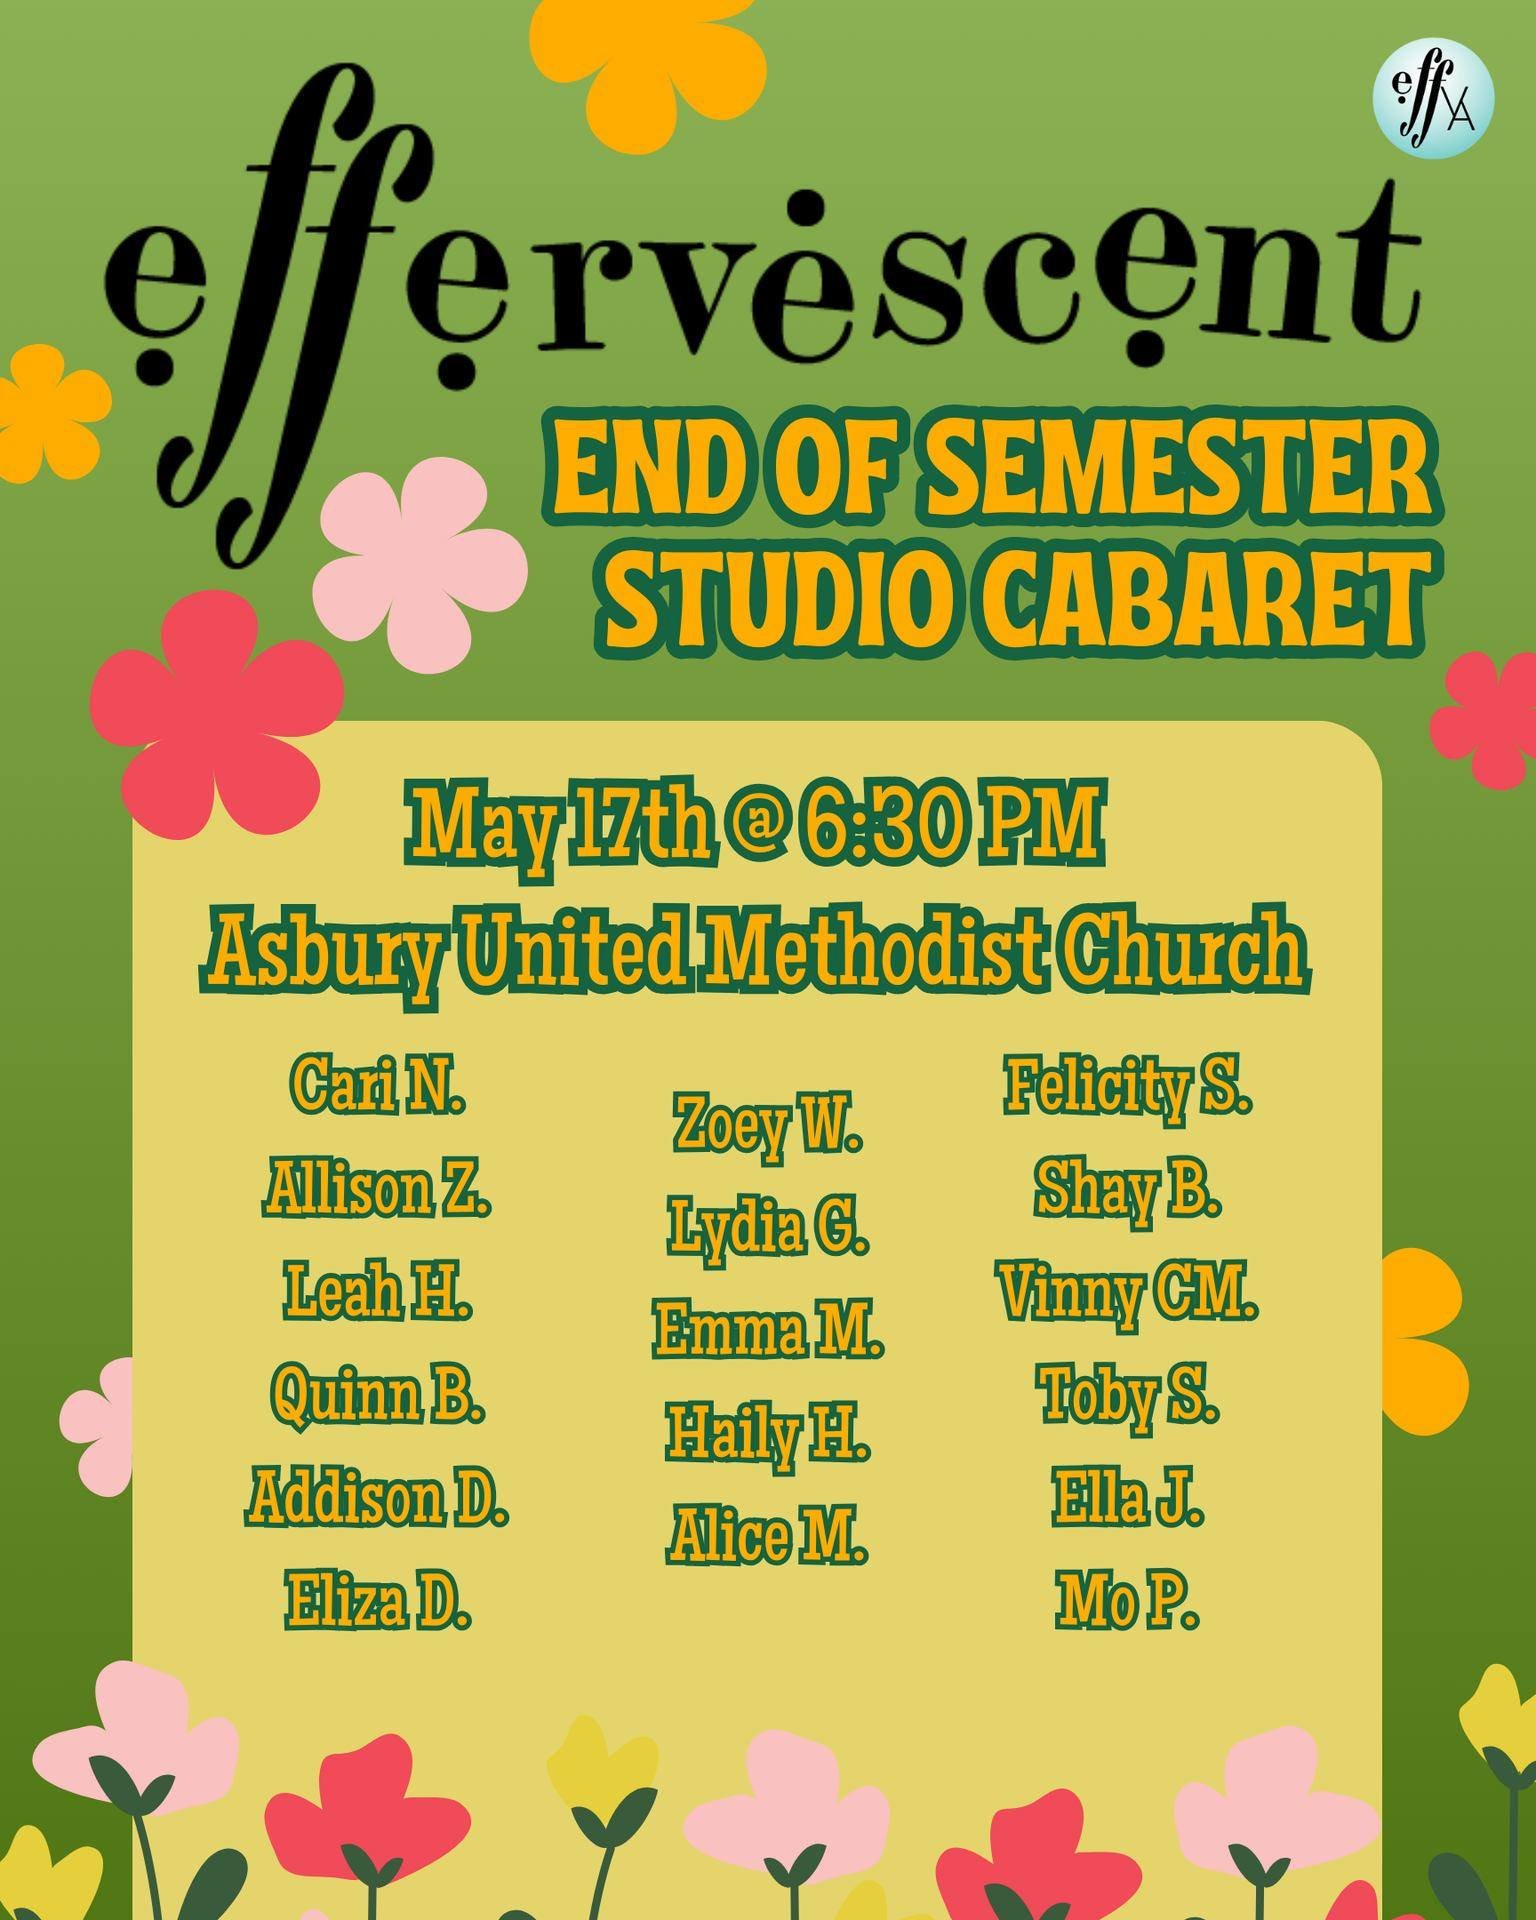 REMINDER! This Friday! ✨

We are holding an End of Semester Studio Cabaret May 17th at 6:30 PM, held at the Asbury United Methodist Church. This event lets students show off how much they have grown during their voice lessons and just have FUN! Come 